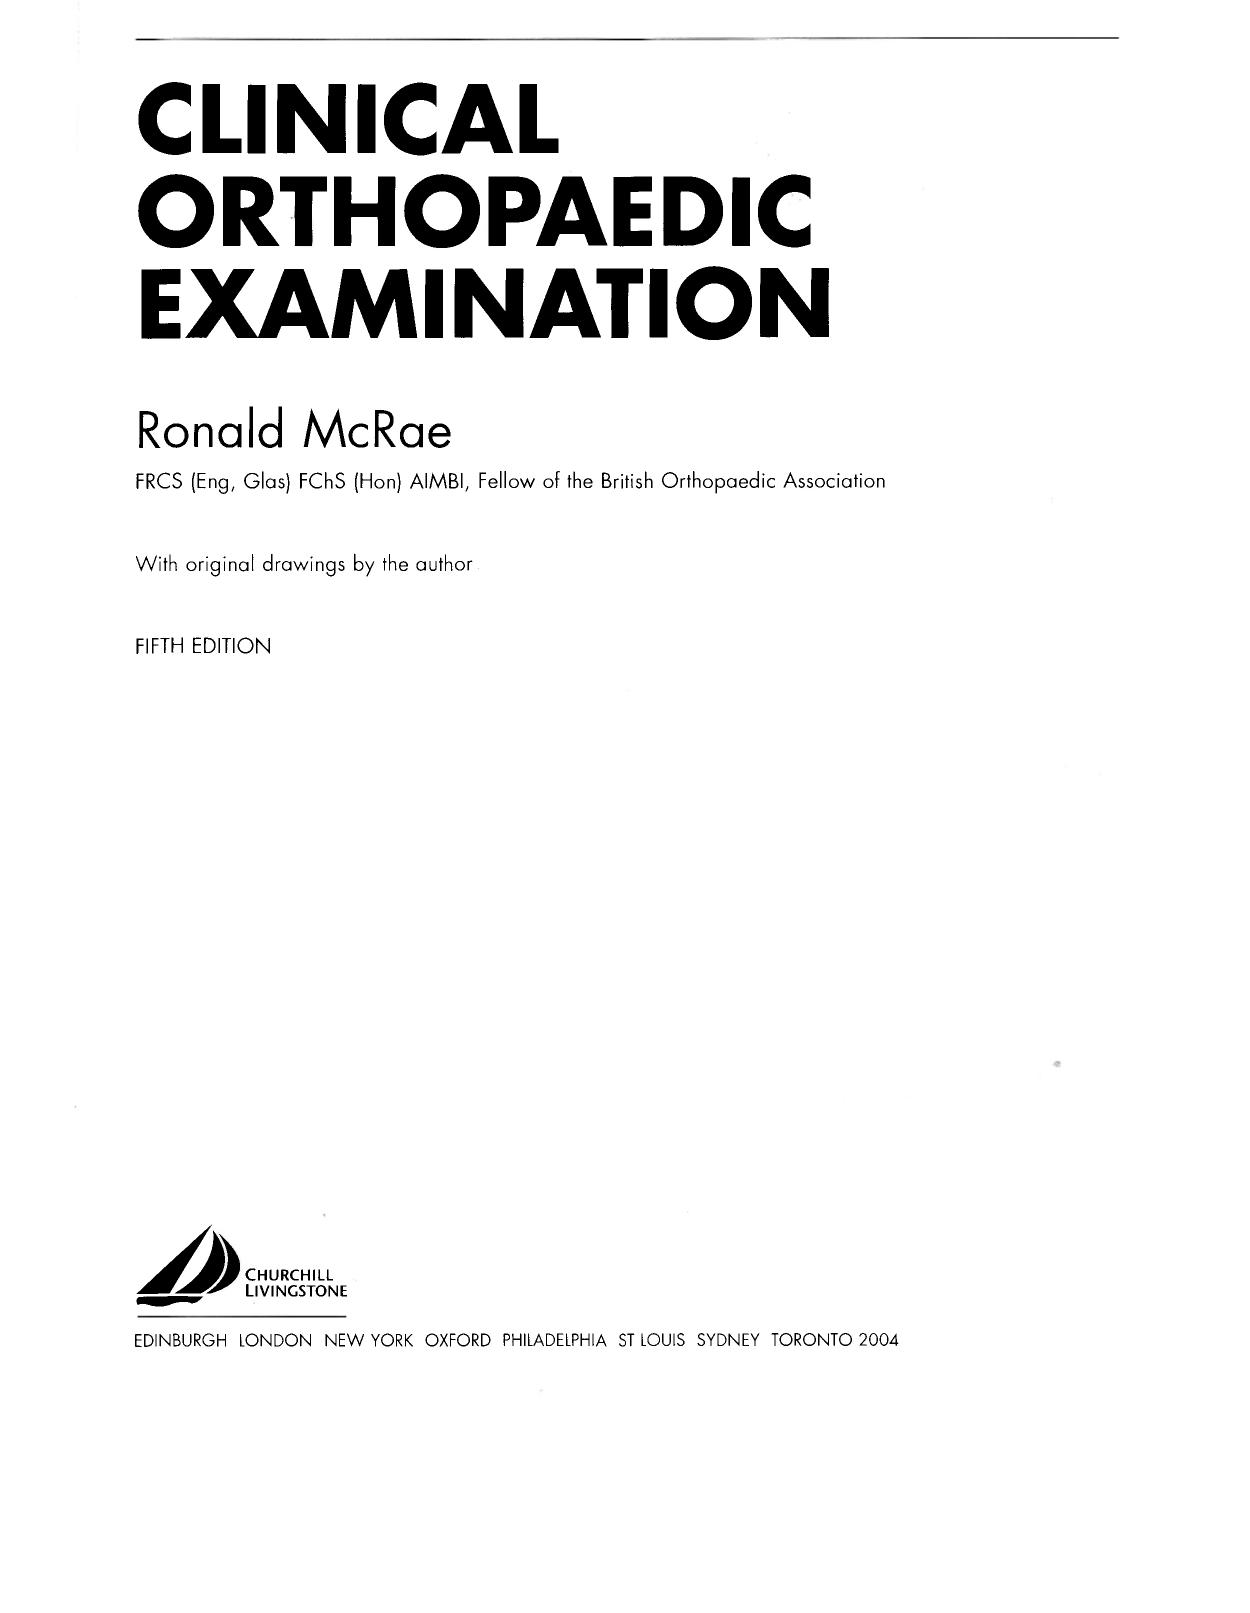 Clinical Orthopaedic Examination, Fifth Edition (2004)